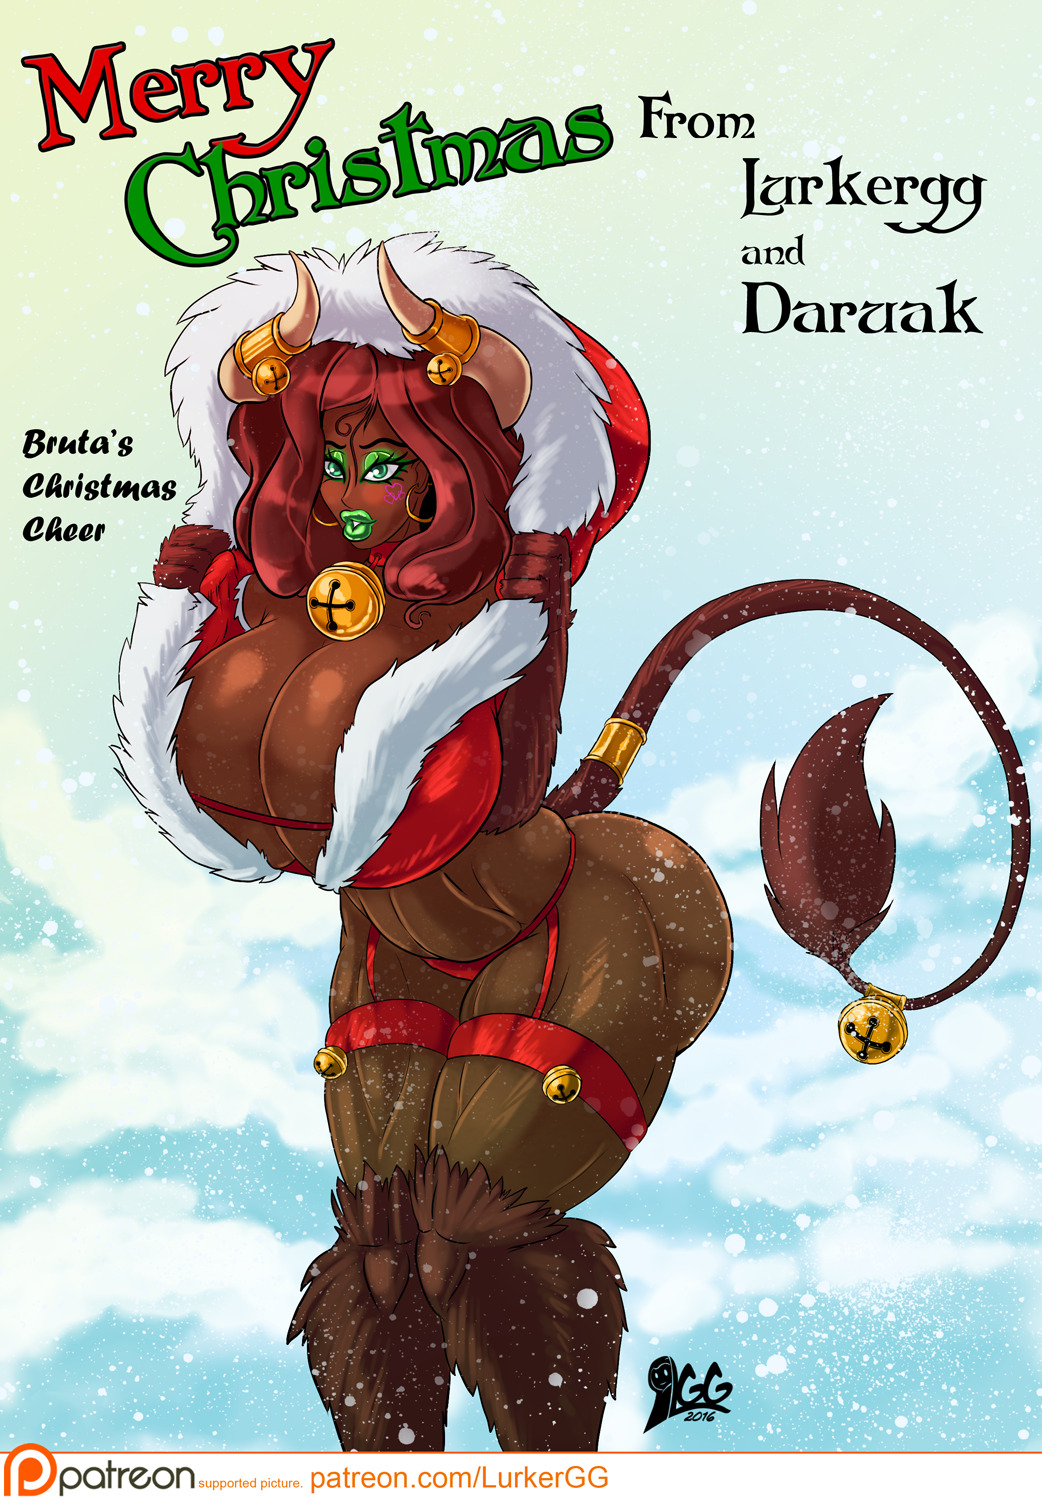 lurkergg:  lurkergg: Merry Christmas to all my fans, readers and patrons from Lurkergg